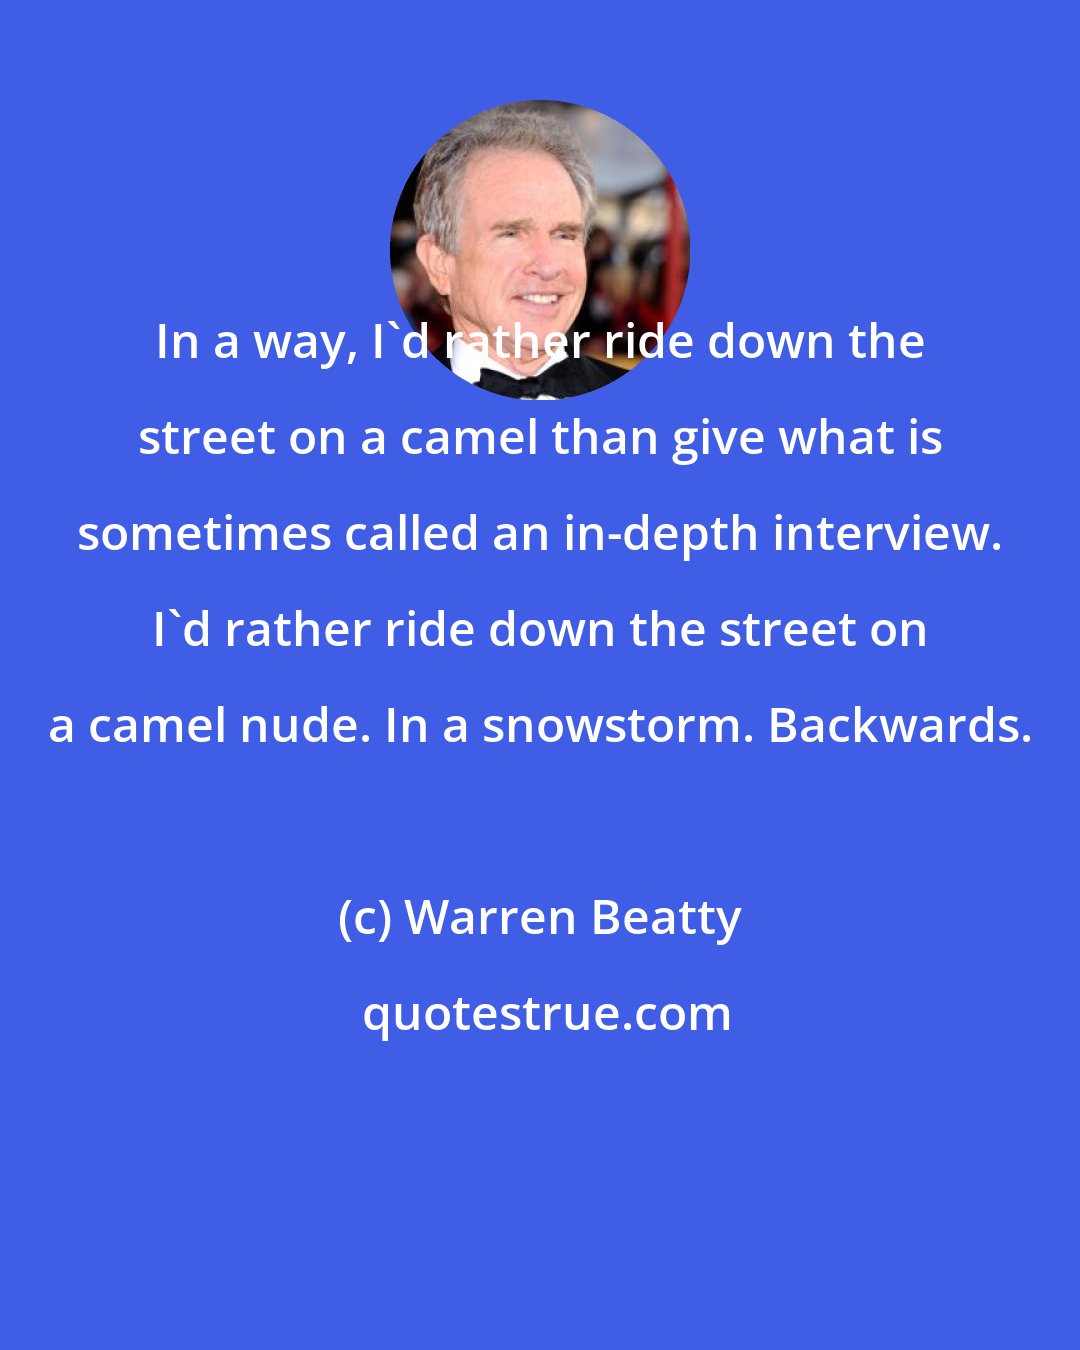 Warren Beatty: In a way, I'd rather ride down the street on a camel than give what is sometimes called an in-depth interview. I'd rather ride down the street on a camel nude. In a snowstorm. Backwards.